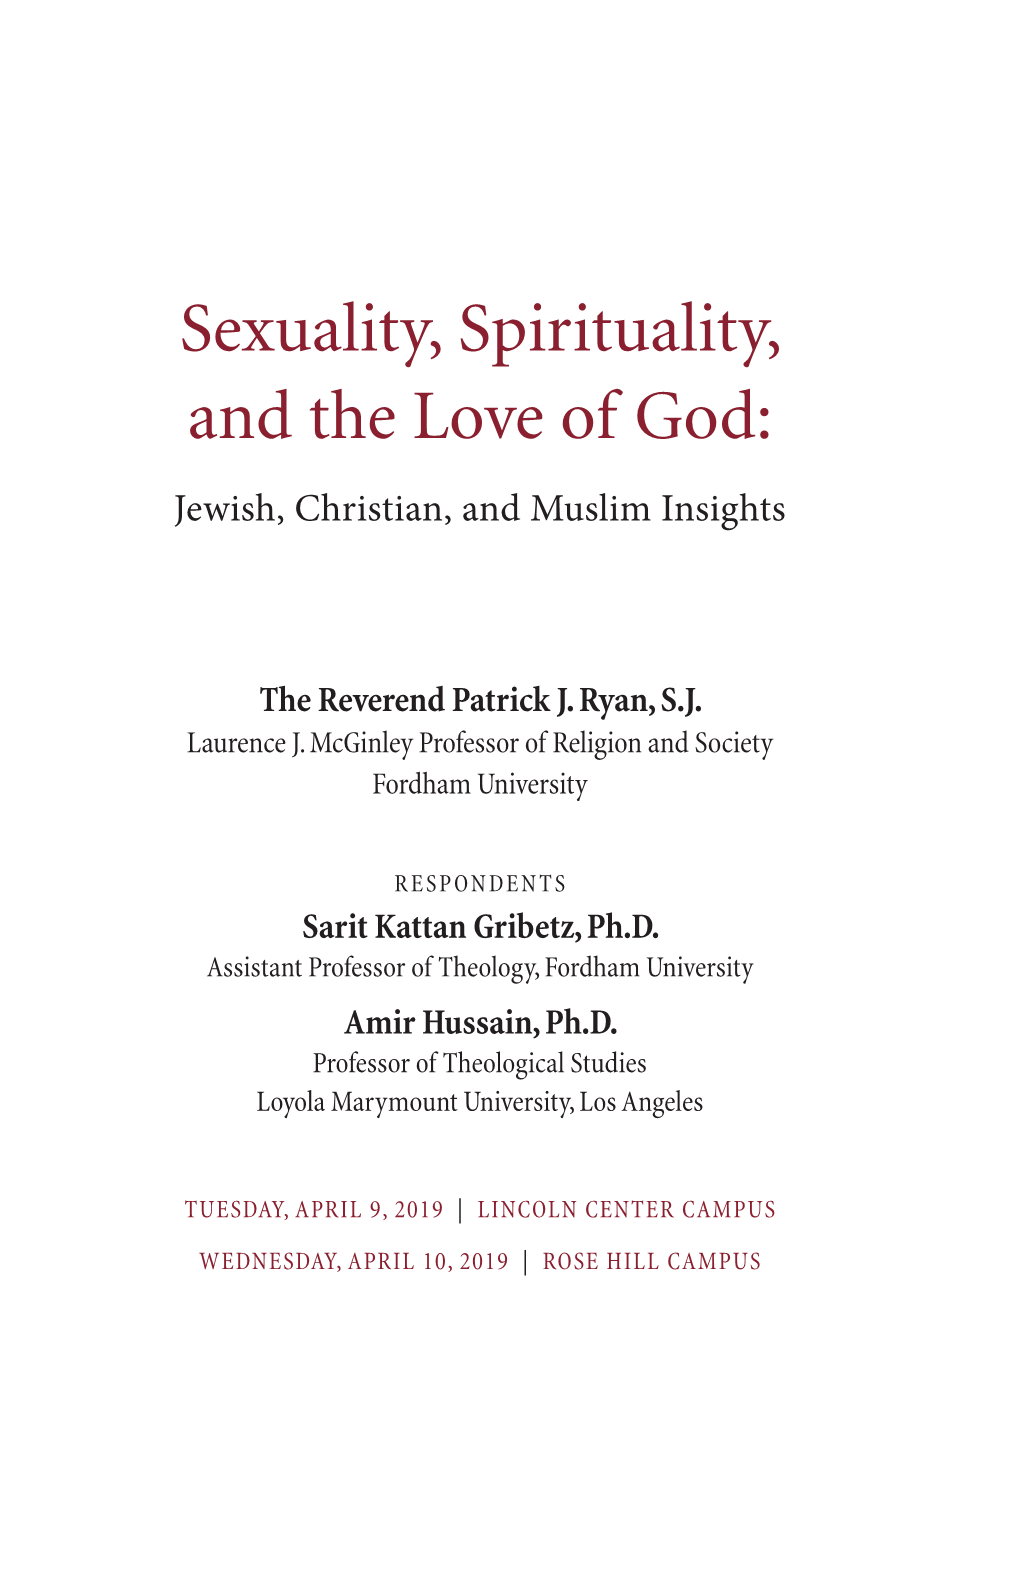 Sexuality, Spirituality, and the Love of God